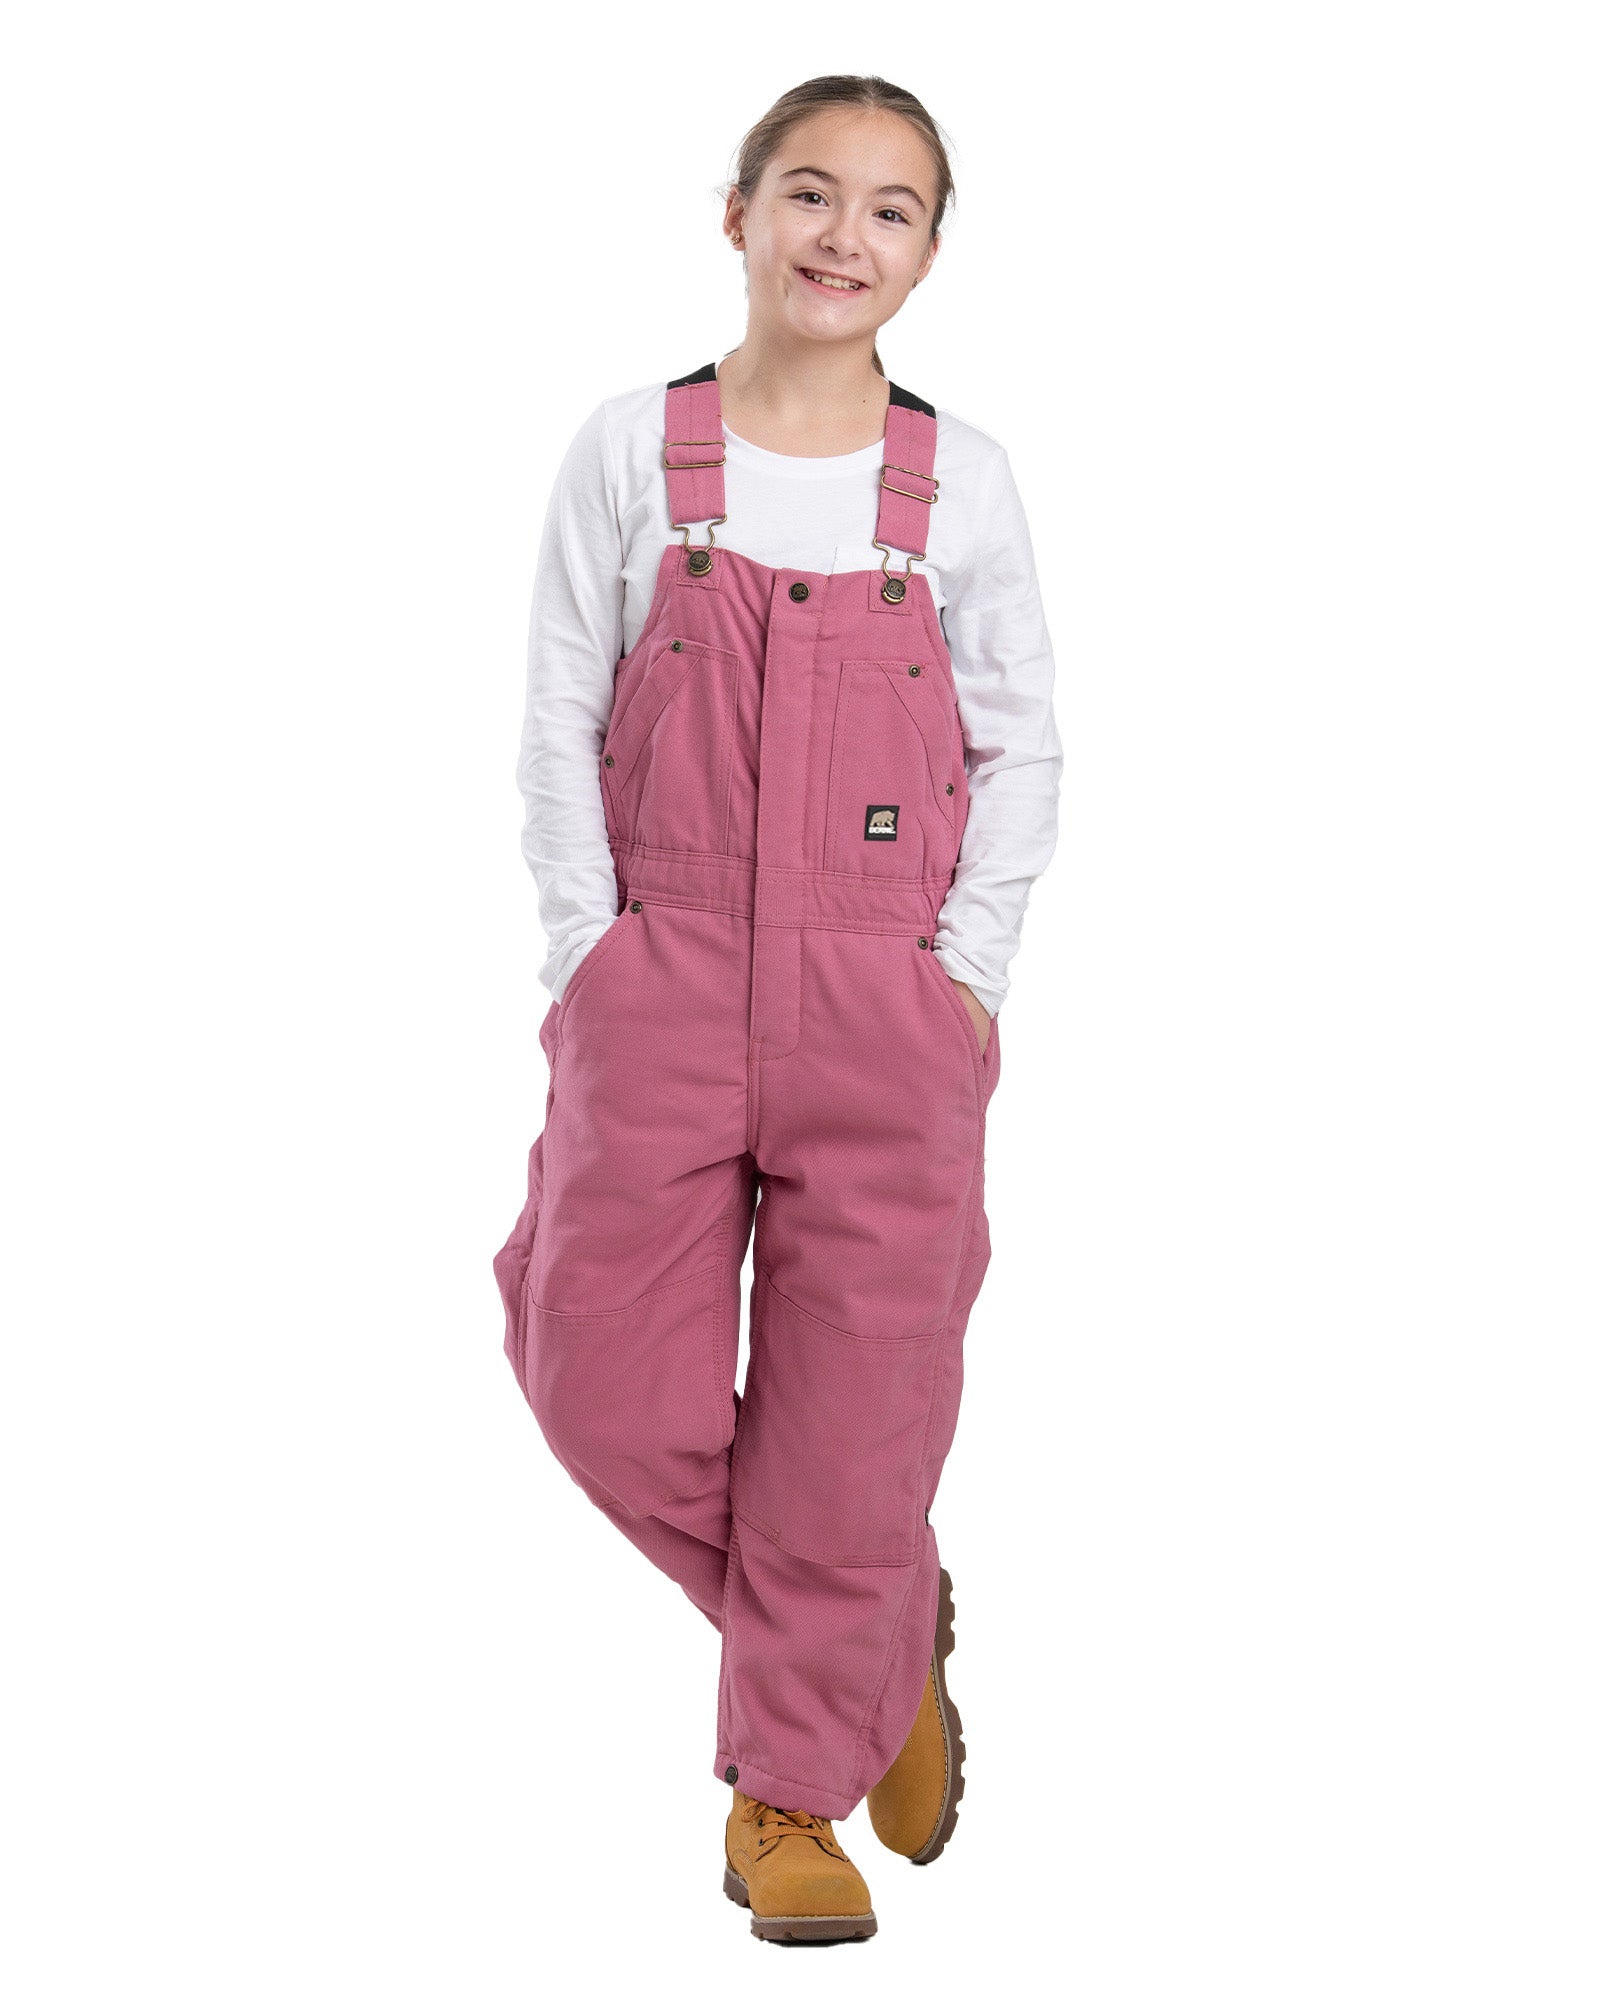 BB21DRE Youth Softstone Insulated Bib Overall